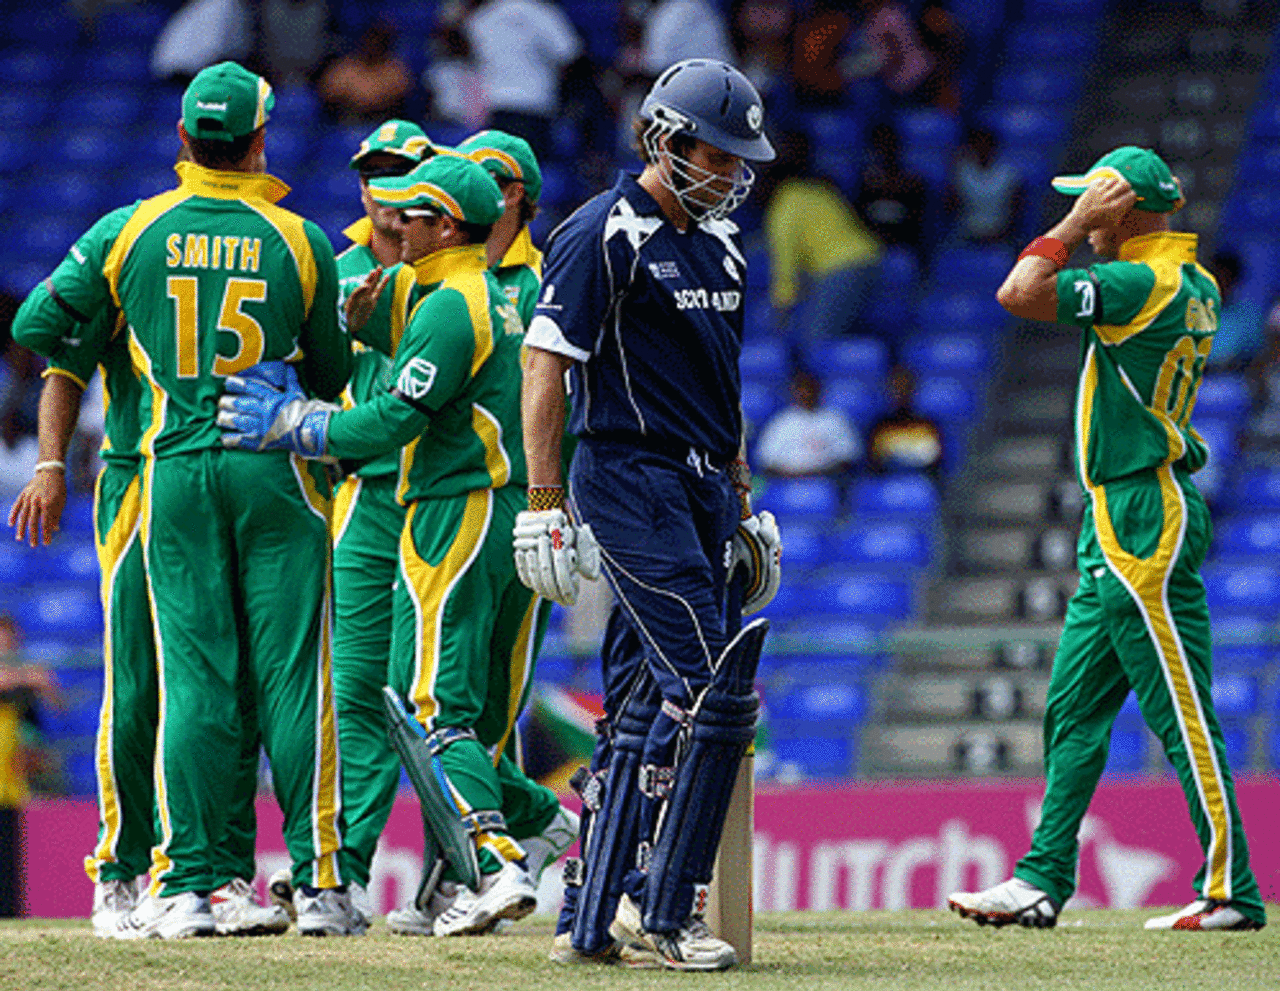 Fraser Watts makes his way back to the pavilion after being dismissed by Charl Langeveldt, Scotland v South Africa, Group A, St Kitts, March 20, 2007